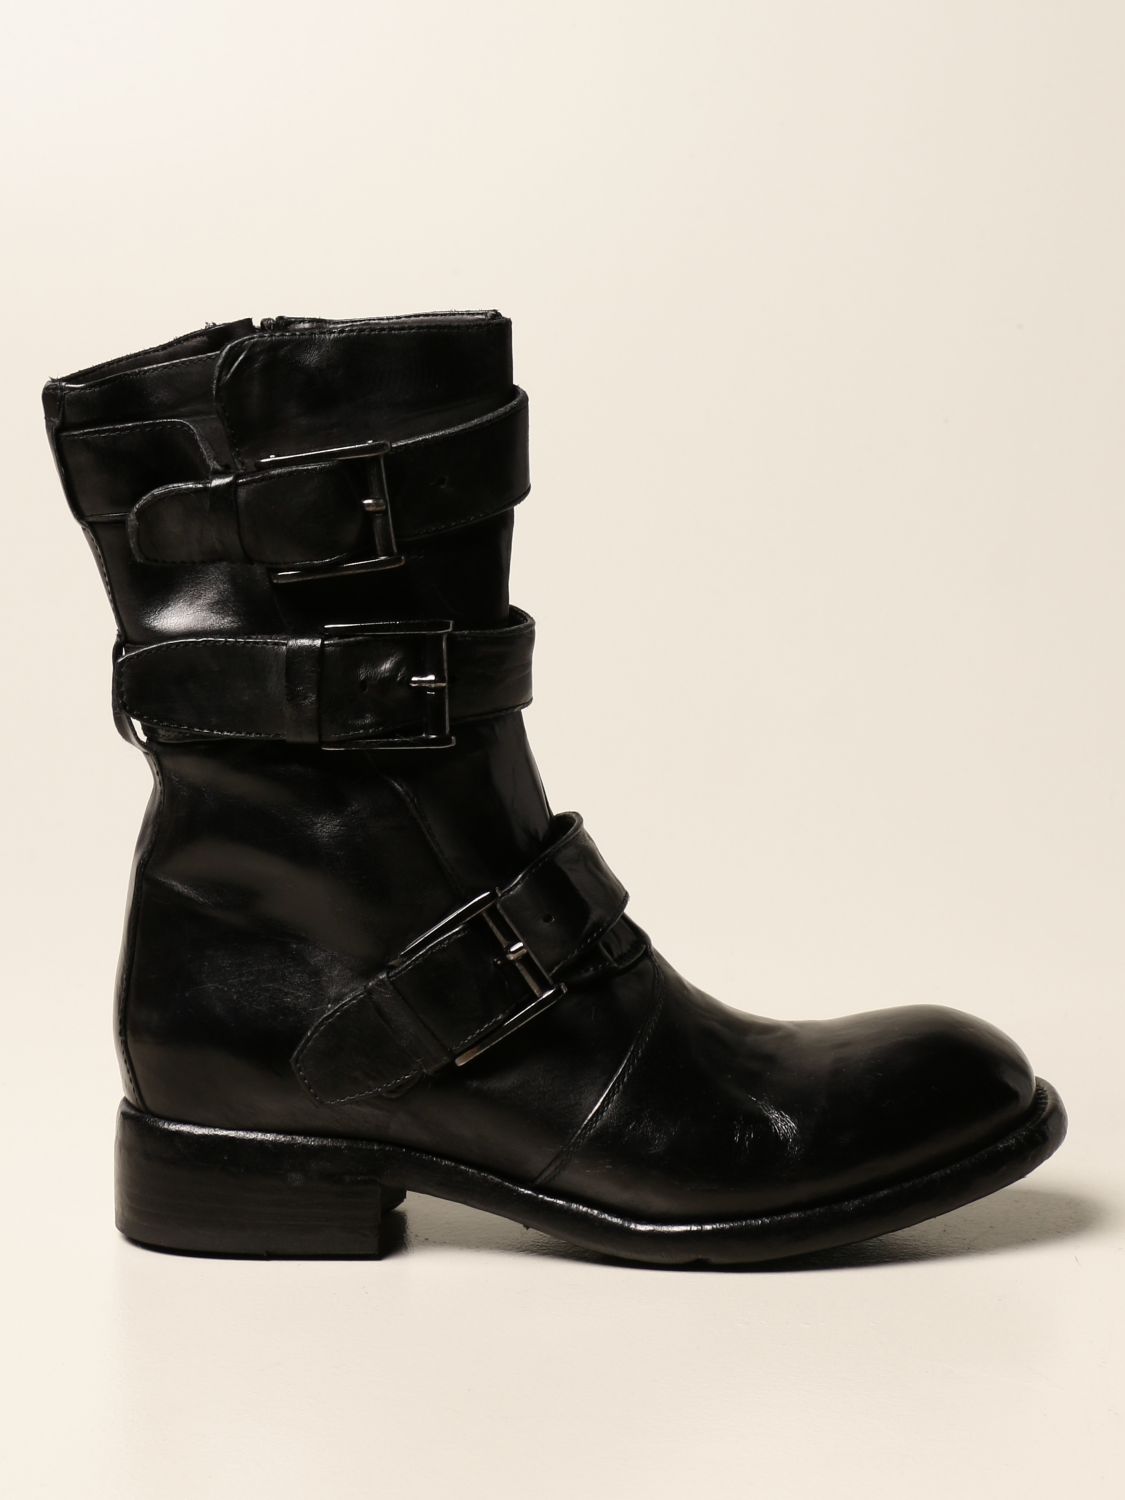 Lemargo Outlet: leather ankle boot with 3 straps - Black | Lemargo flat ...